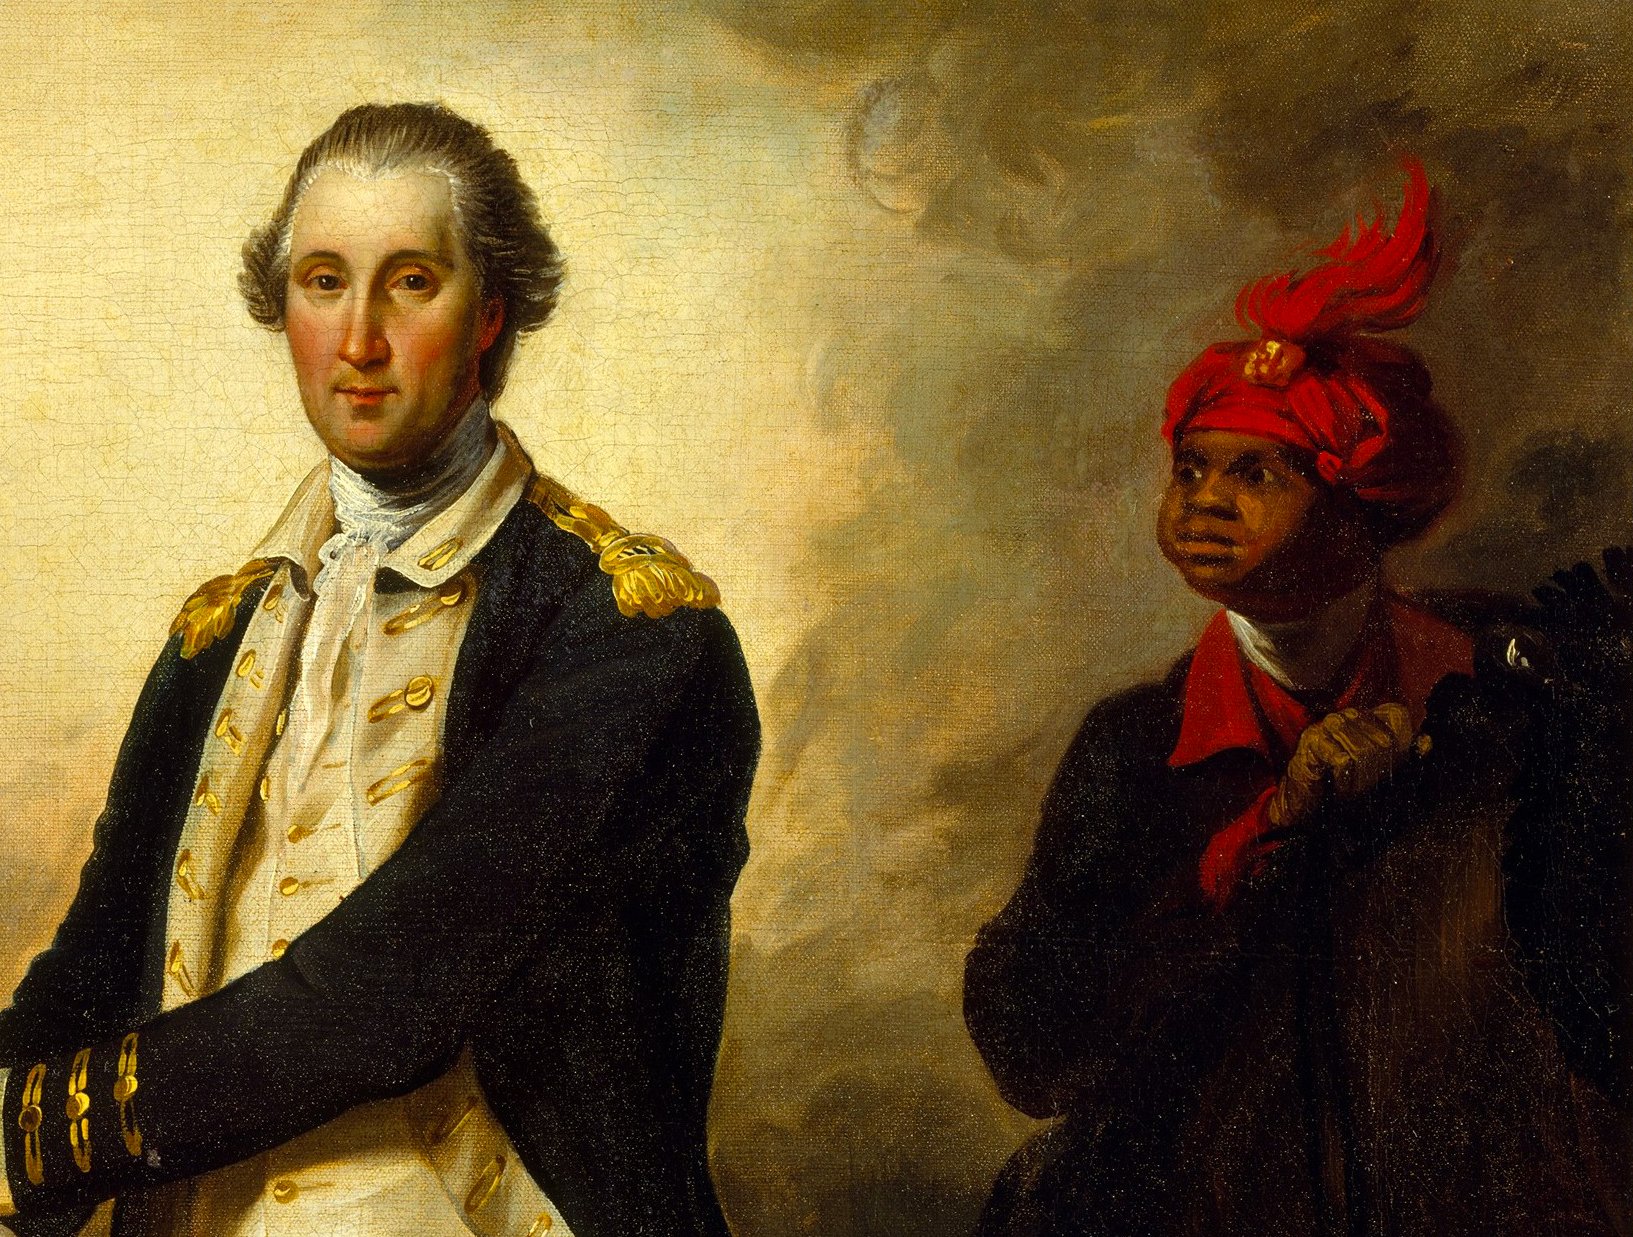 An oil painting of George Washington and William Lee, his enslaved valet, during the American Revolutionary War. Washington is wearing a blue coat with gold epaulets. Lee is standing behind him, holding Washington’s horse by the reins.The painting depicts Washington as the commander-in-chief of the Continental Army and Lee as his faithful attendant.